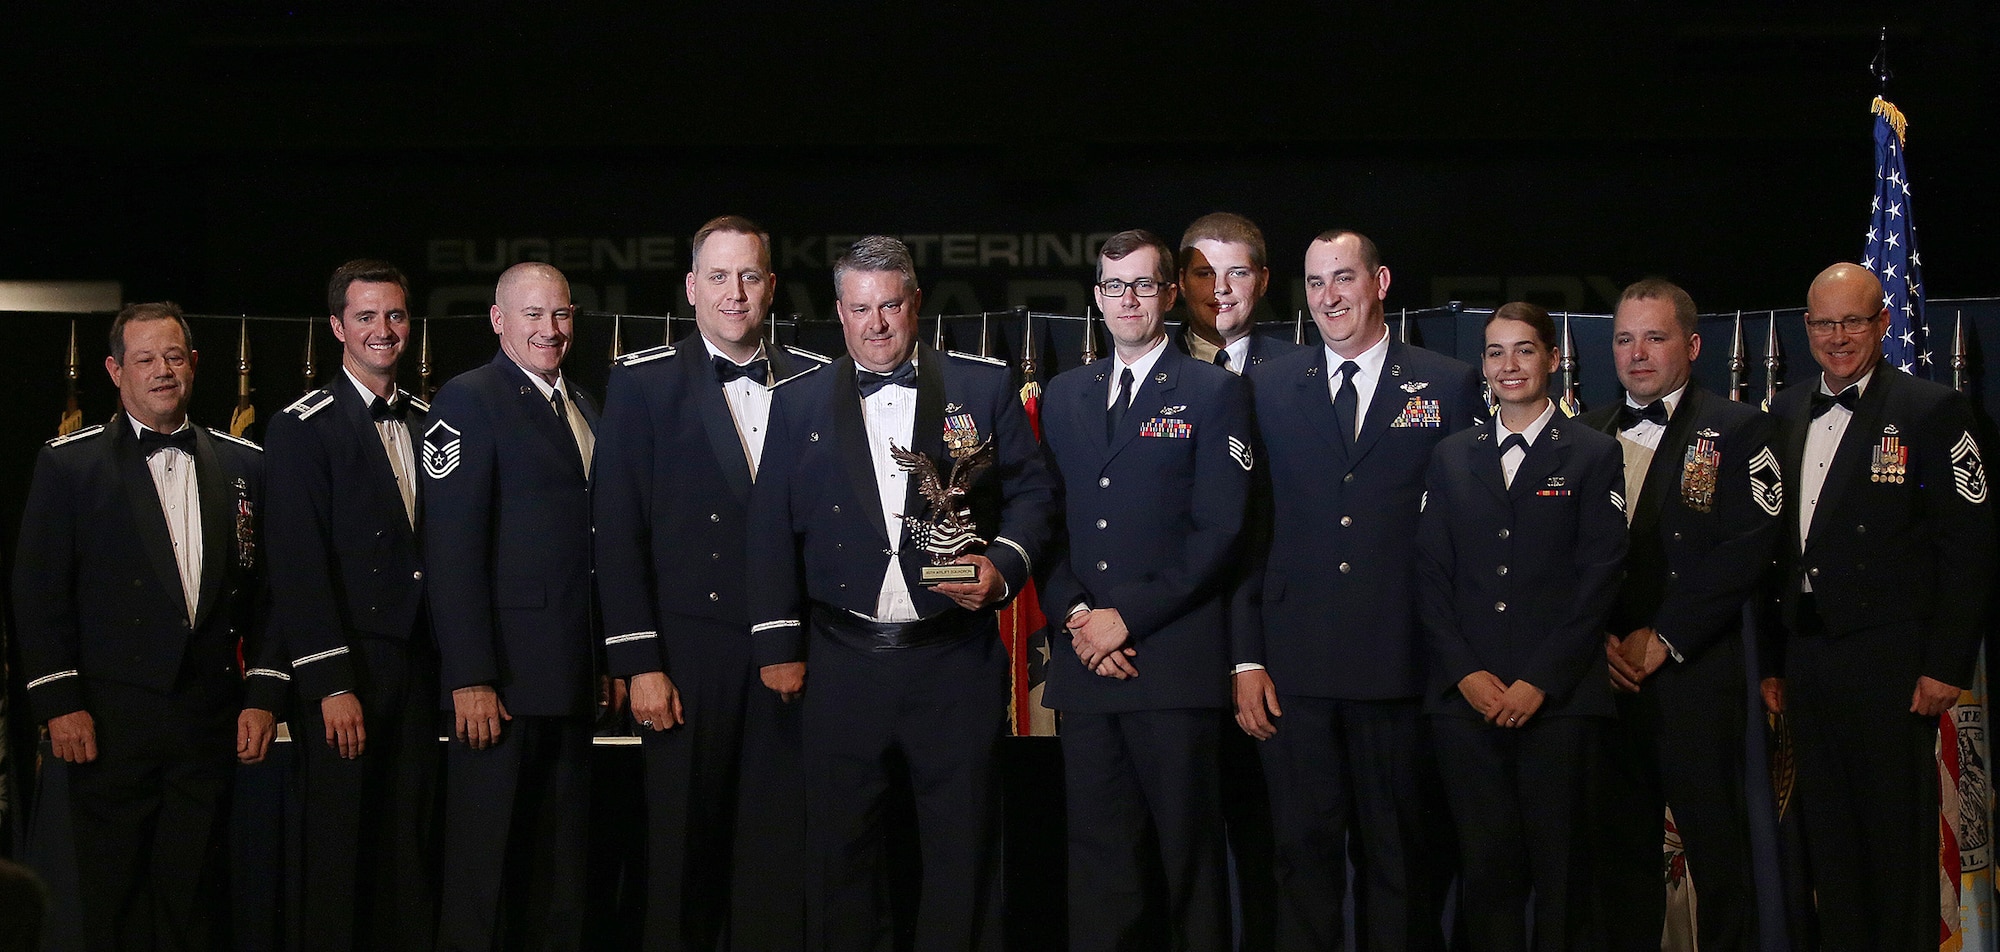 Members of the 89th Airlift Squadron accept the 445th Airlift Wing 2017 Squadron of the Year Award from Col. Adam Willis, 445th Airlift Wing commander, and Chief Master Sgt. Paul Stewart, 445 AW command chief, during the wing's annual awards banquet held April 7, 2018 at the National Museum of the U.S. Air Force